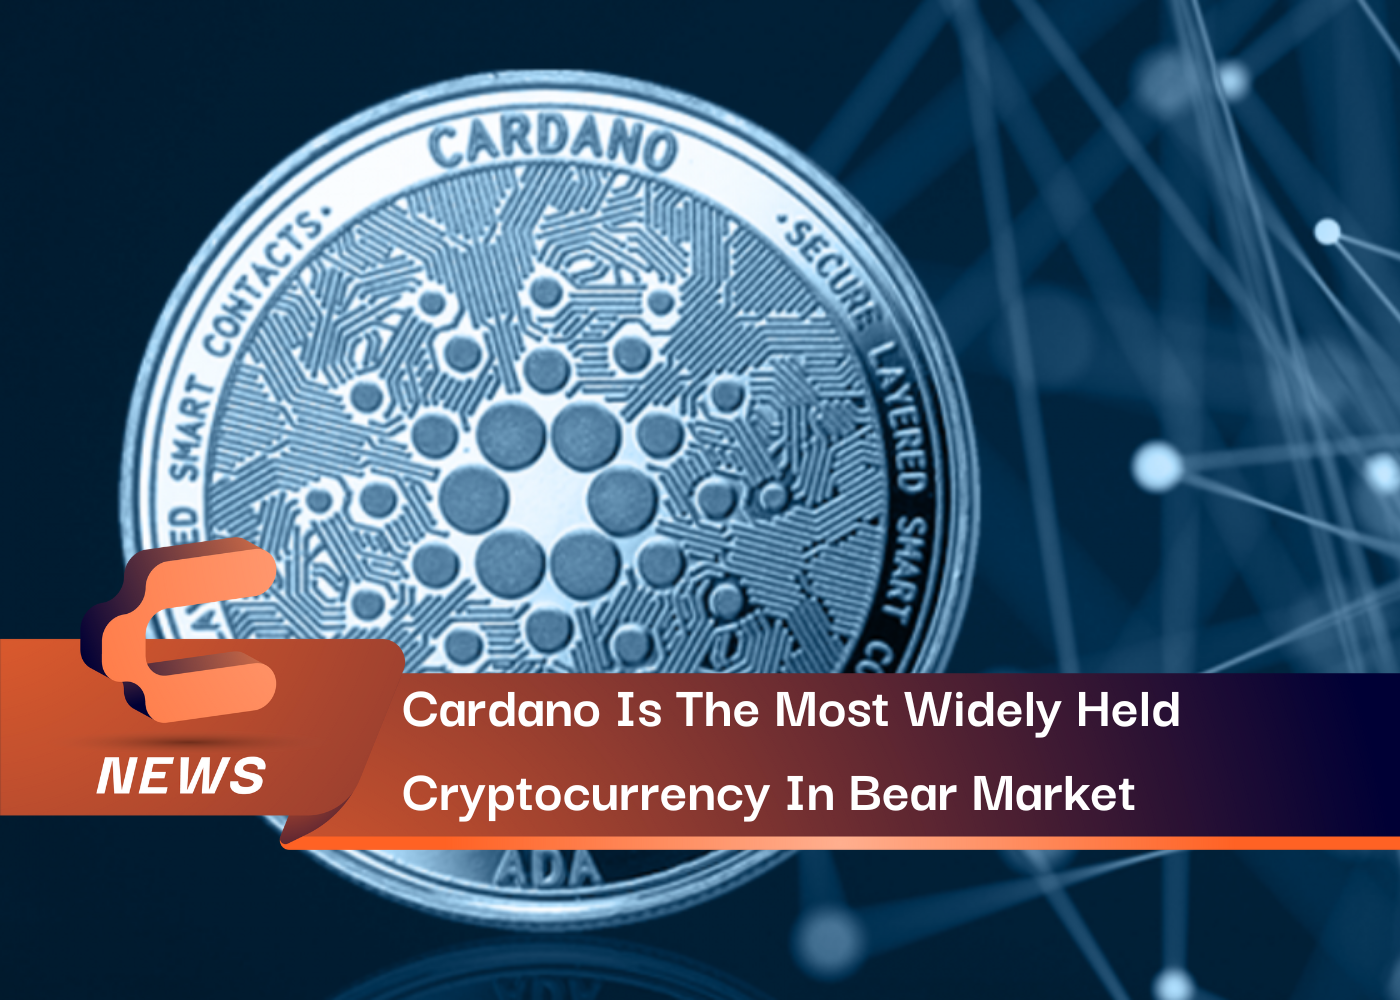 Cardano Is The Most Widely Held Cryptocurrency In Bear Market